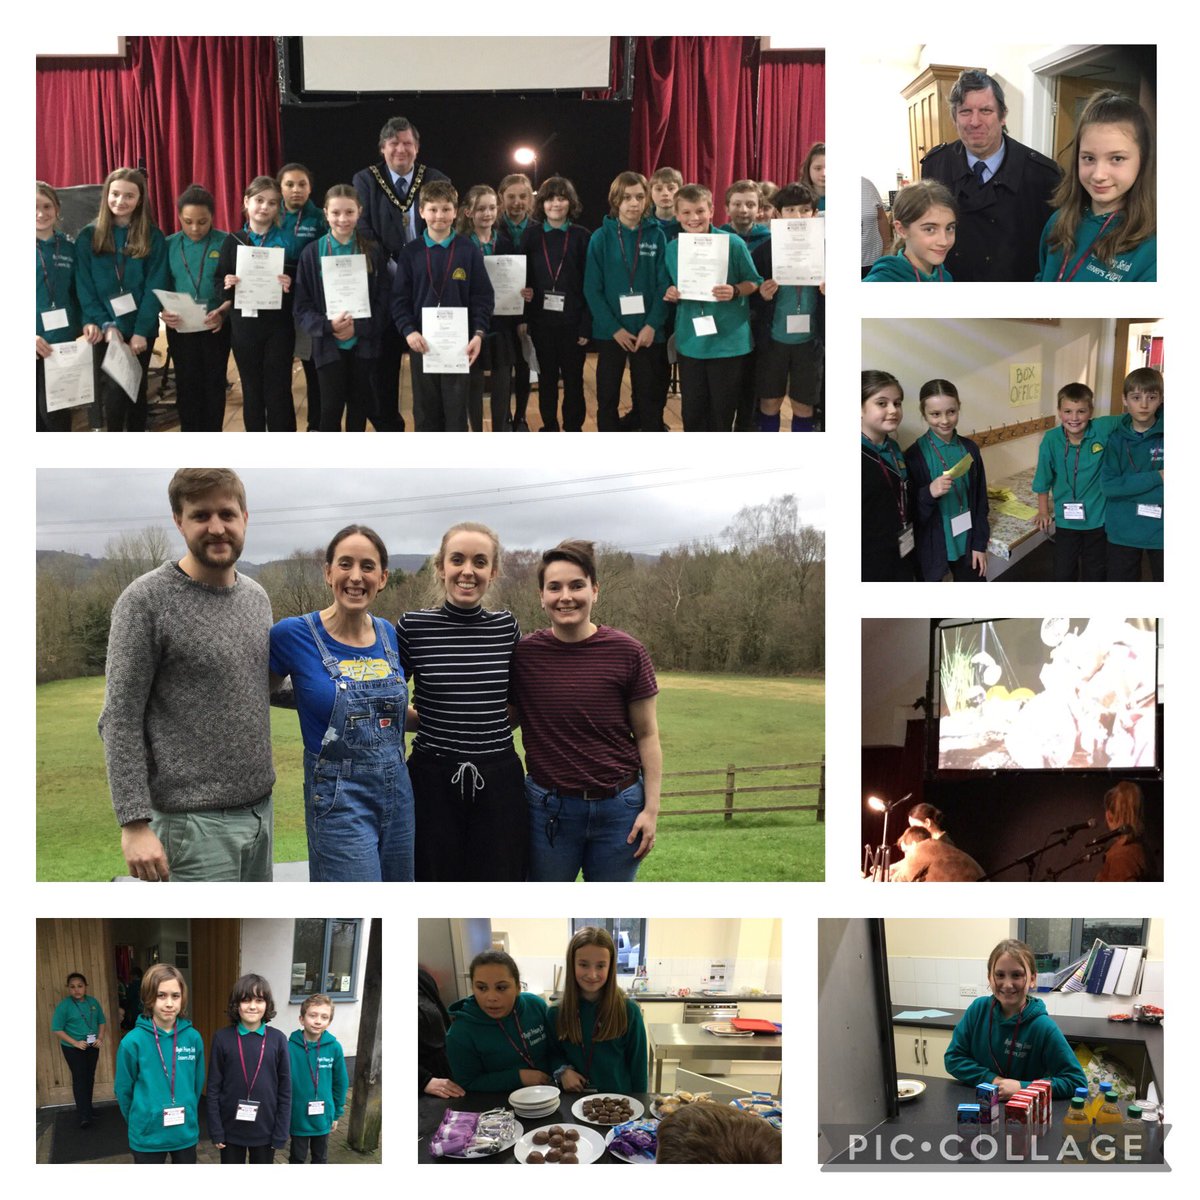 What a wonderful evening we all had on Wednesday at Rudry Parish Hall. Gold Class had the responsibility of promoting Half a strings production of Breathe. @NOutNAllan @CaerphillyCBC @CCBCarts @HalfaString